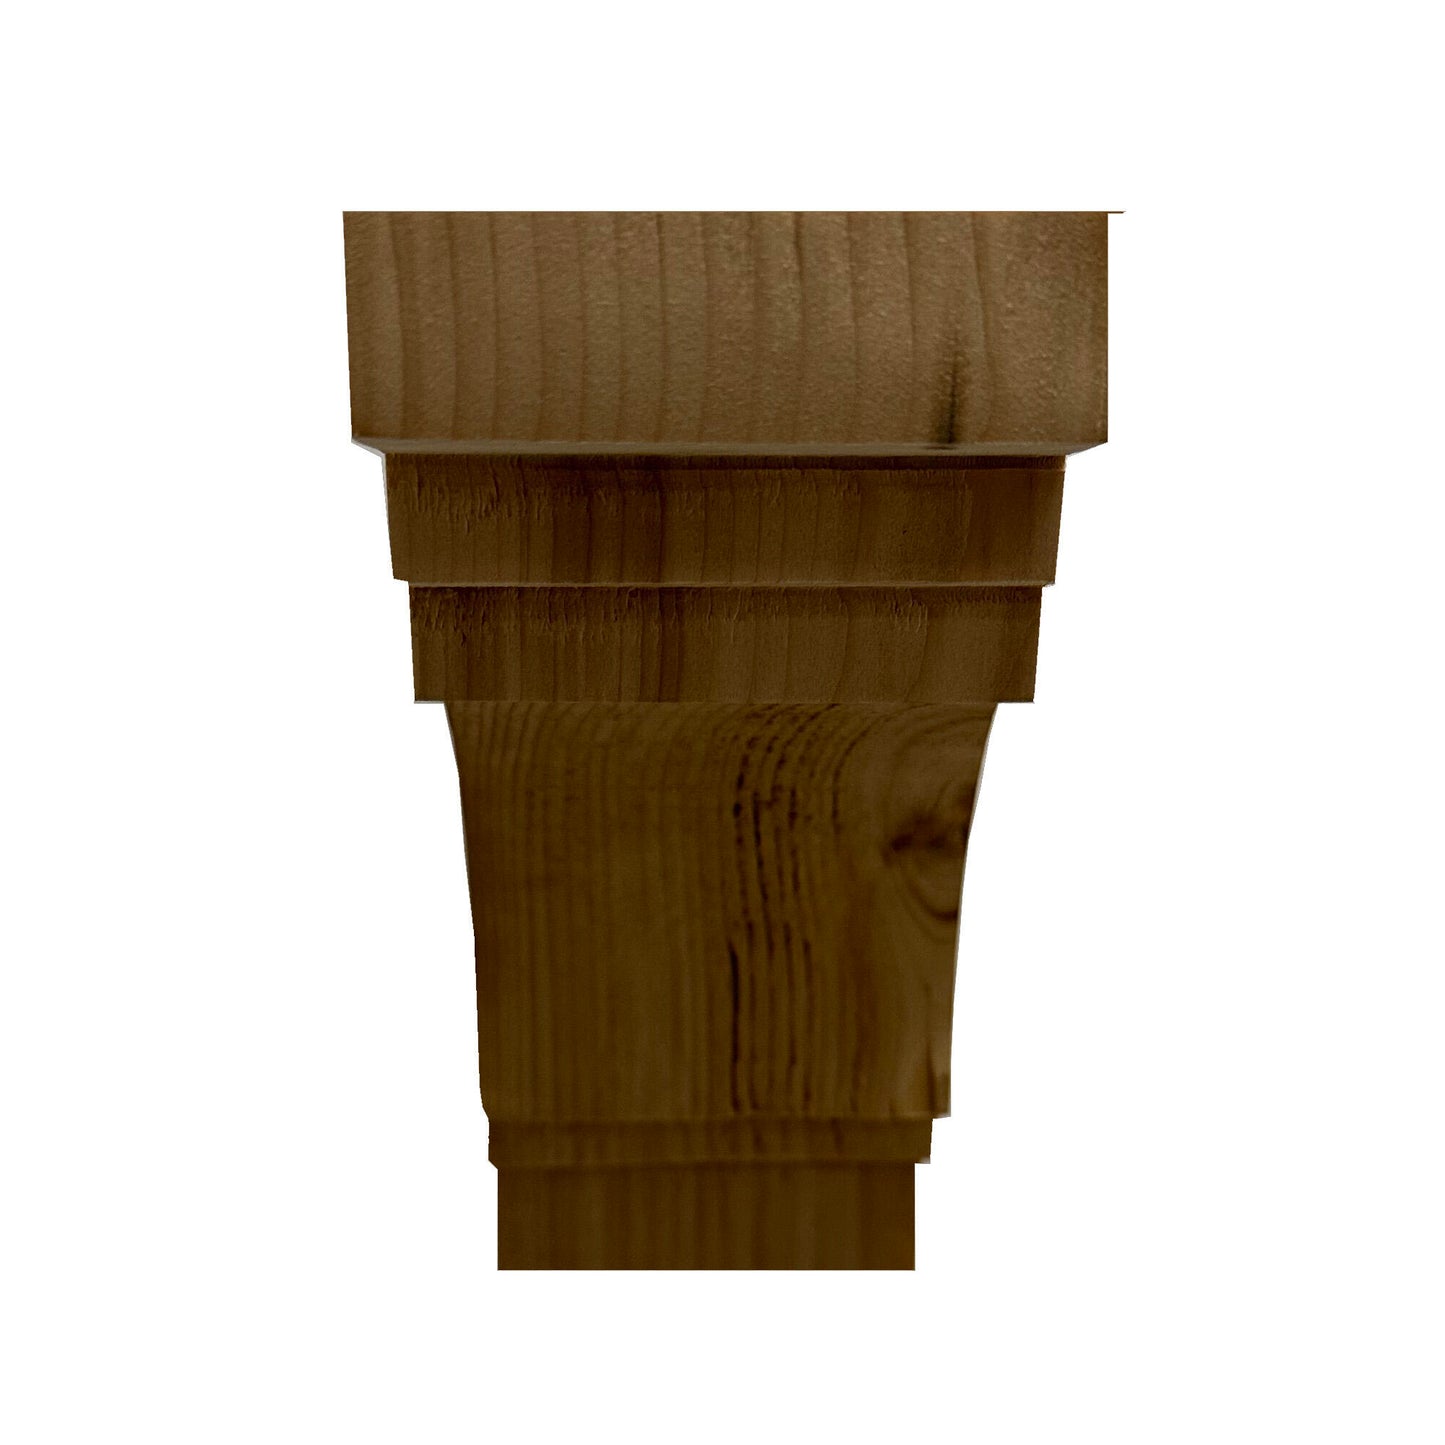 front view of the corbel showing the steps along with the arch. Grain patterns are displayed in the wood.